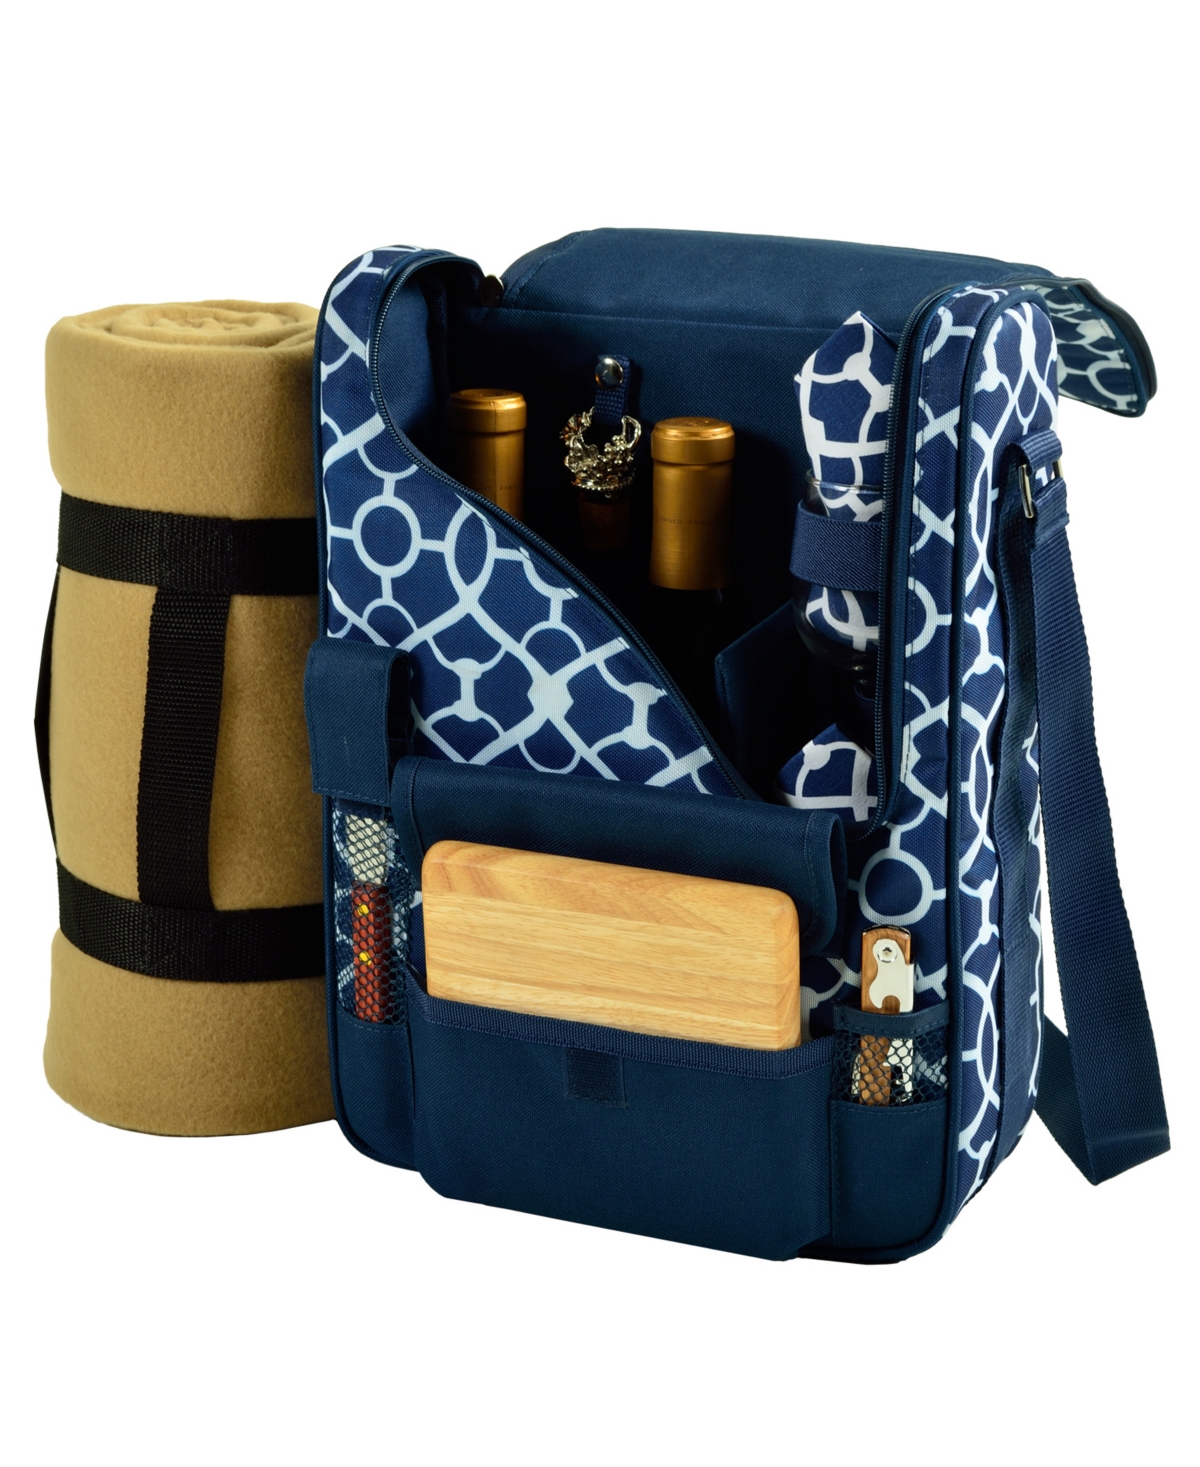 Bordeaux Insulated Wine, Cheese Tote with Blanket-Glass Glasses - Blue